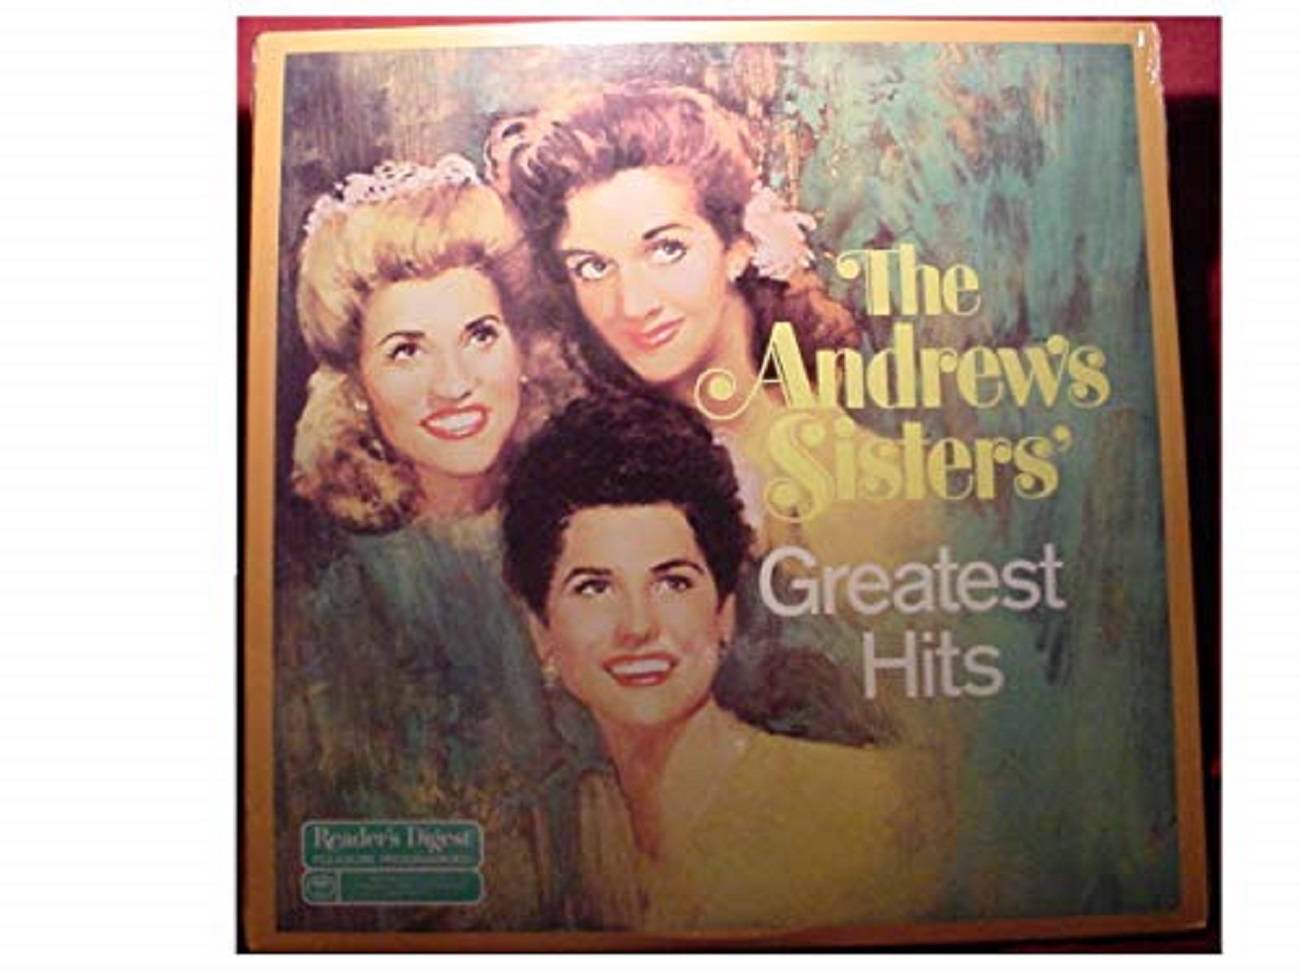 The Andrews Sisters Greatest Hits Album Wallpaper